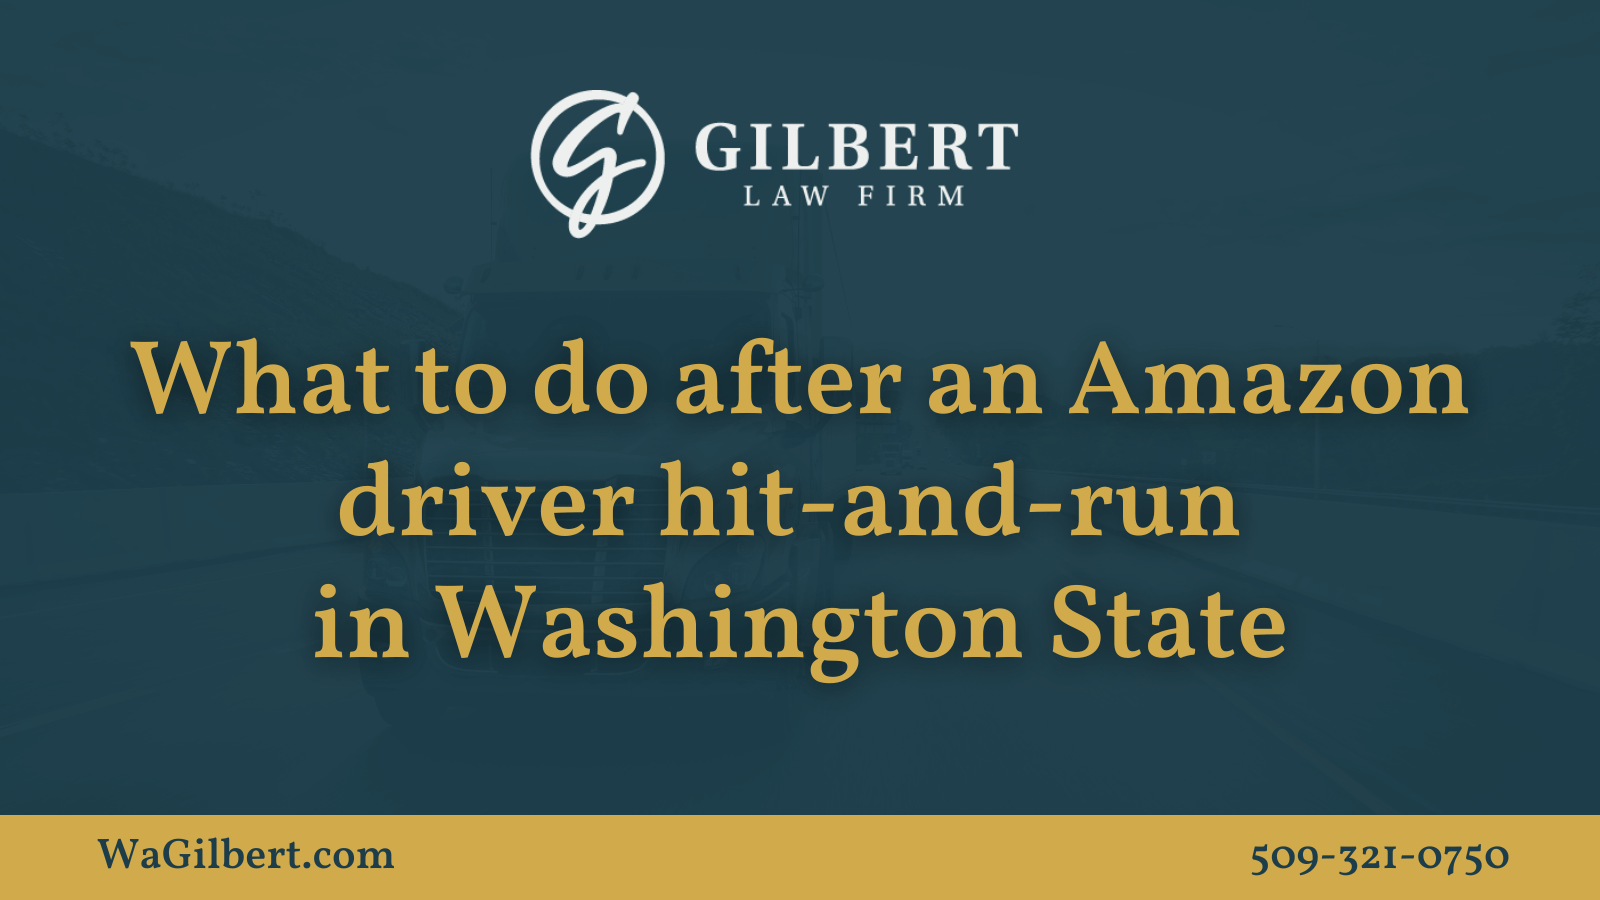 What to do after an Amazon driver hit-and-run in Washington State | Gilbert Law Firm Spokane Washington